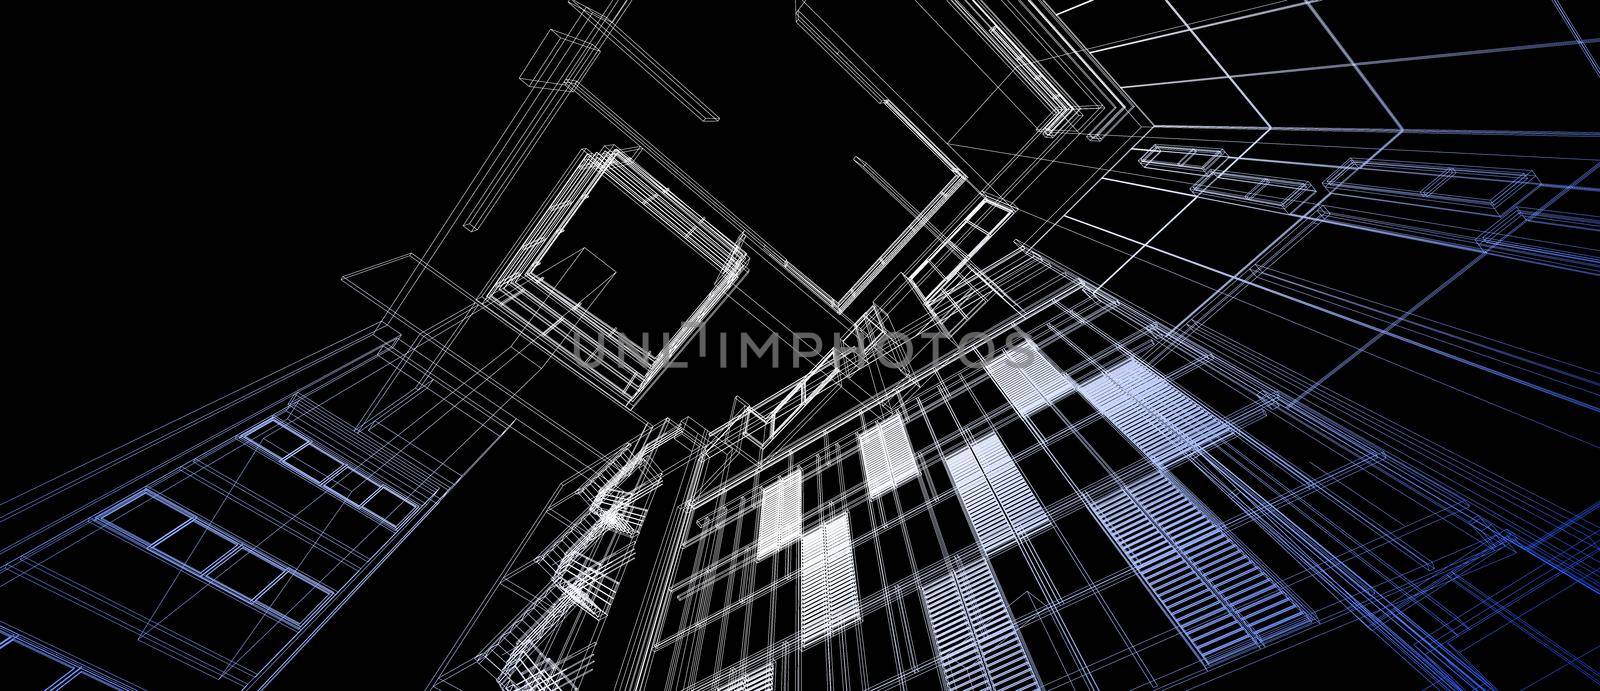 Architecture building space design concept 3d perspective gradient color wire frame rendering black background. For abstract background or wallpaper desktops computer technology design architectural theme.